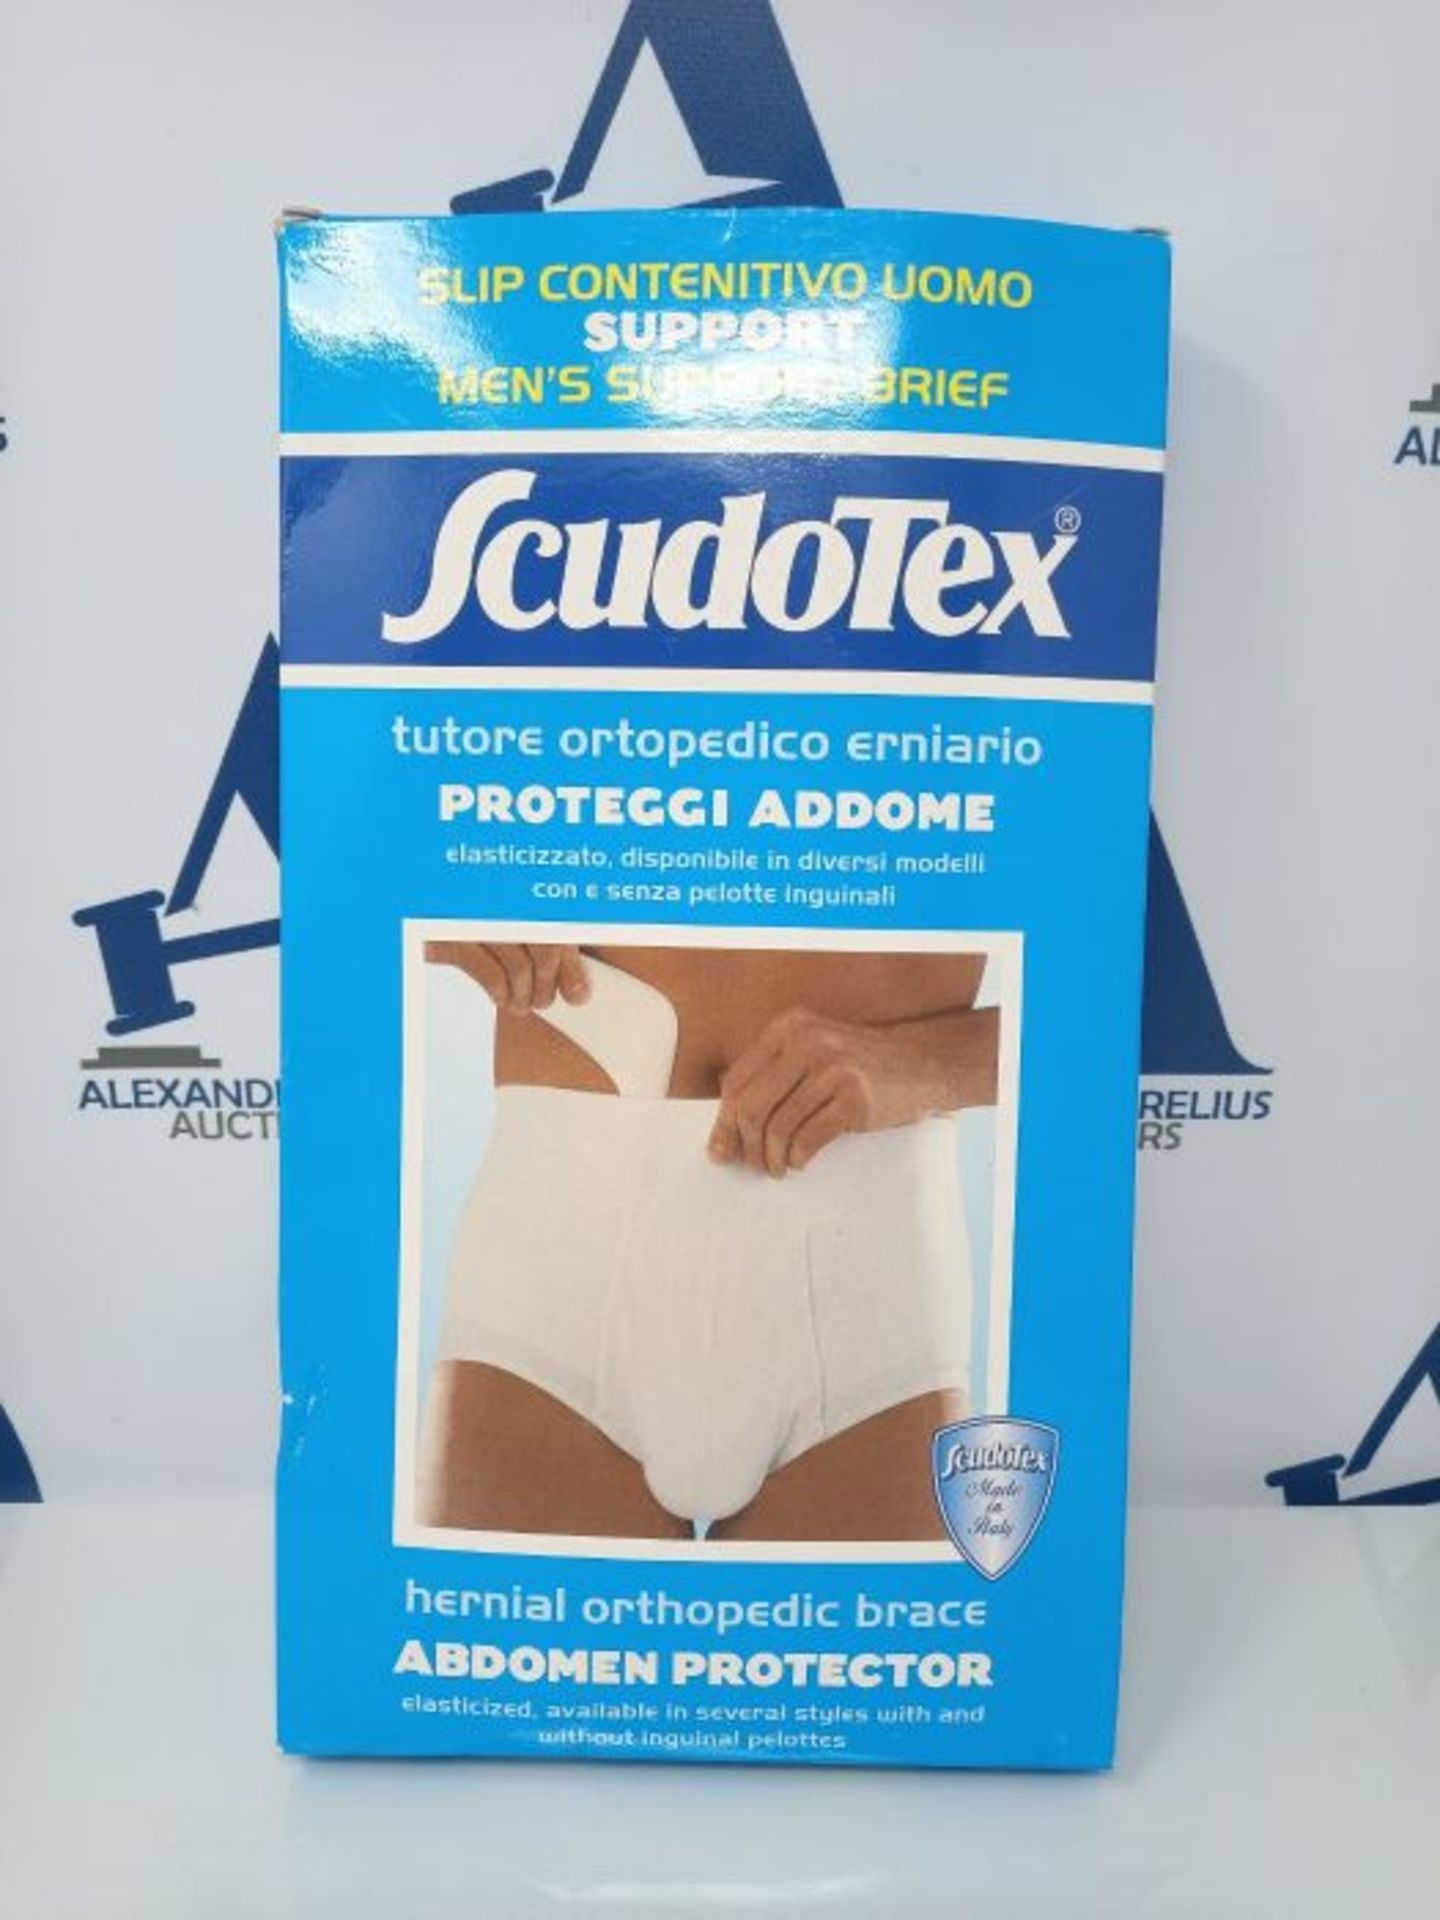 Scudotex Hernia Containment Briefs with Balls High Waist Grey Size 6 - 1 Unit - Image 2 of 3